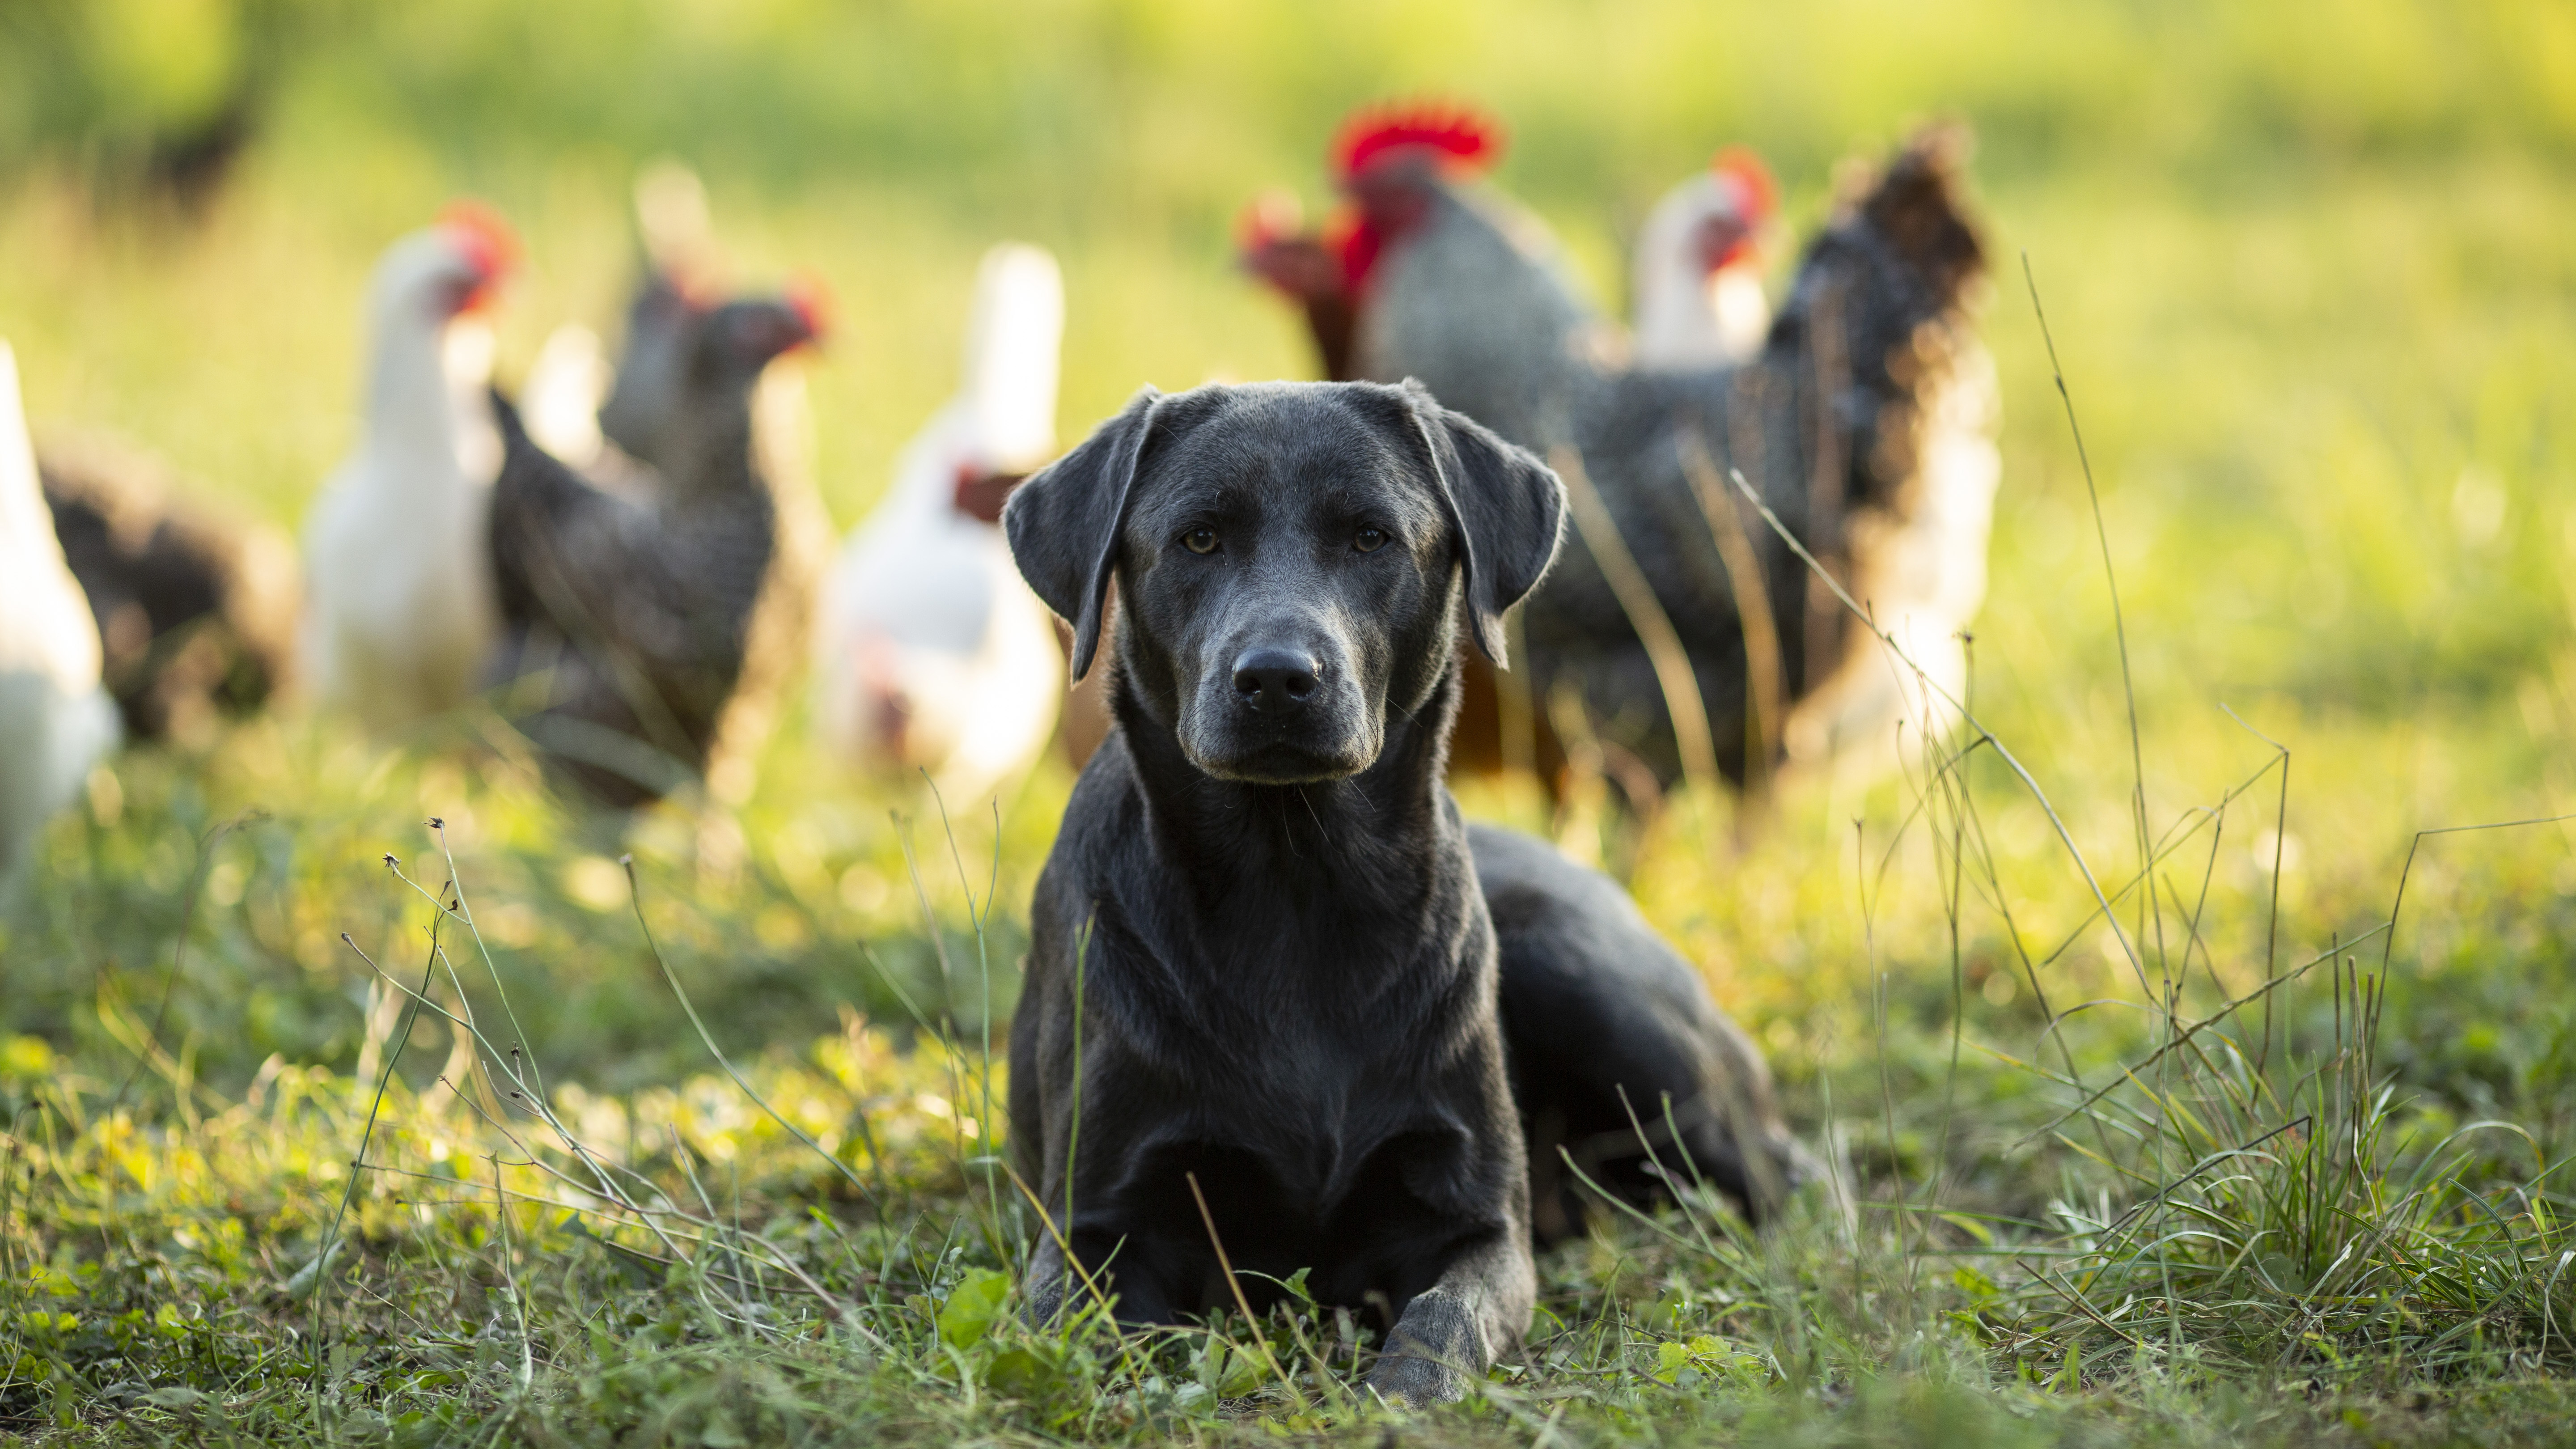 Dog guarding chickens (16:9)